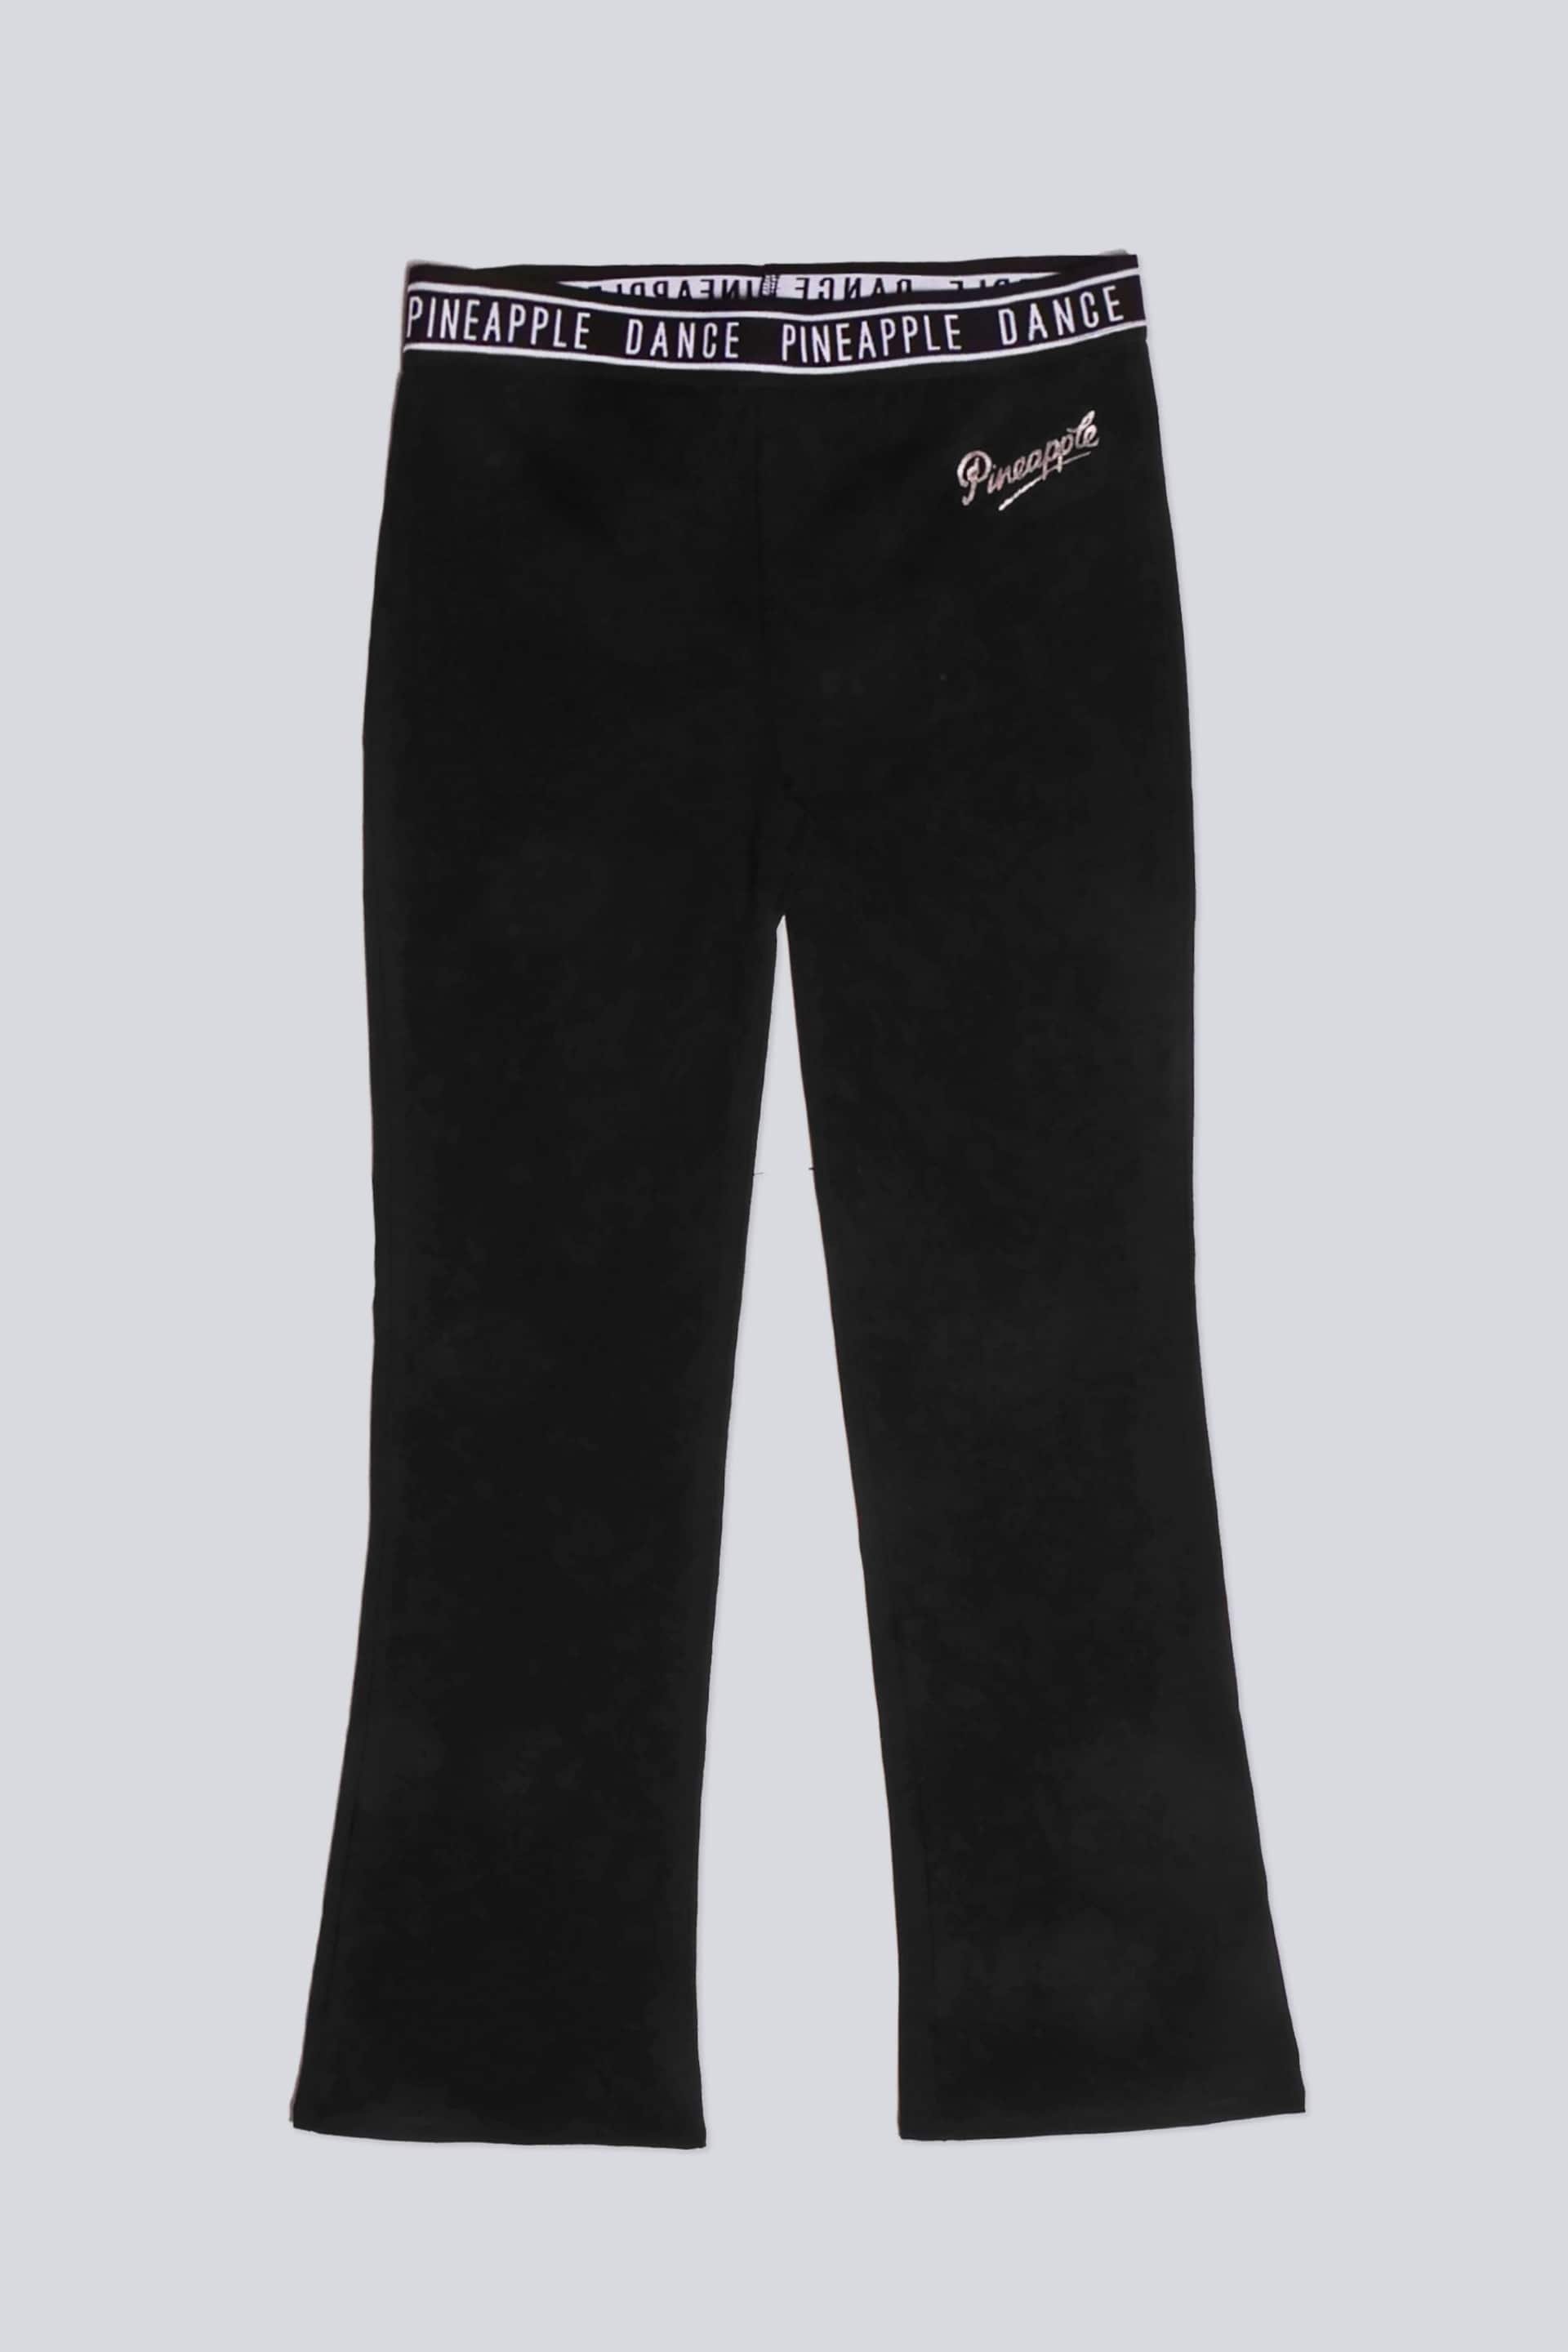 Pineapple Black Flare Girls Jersey Trousers - Image 5 of 5